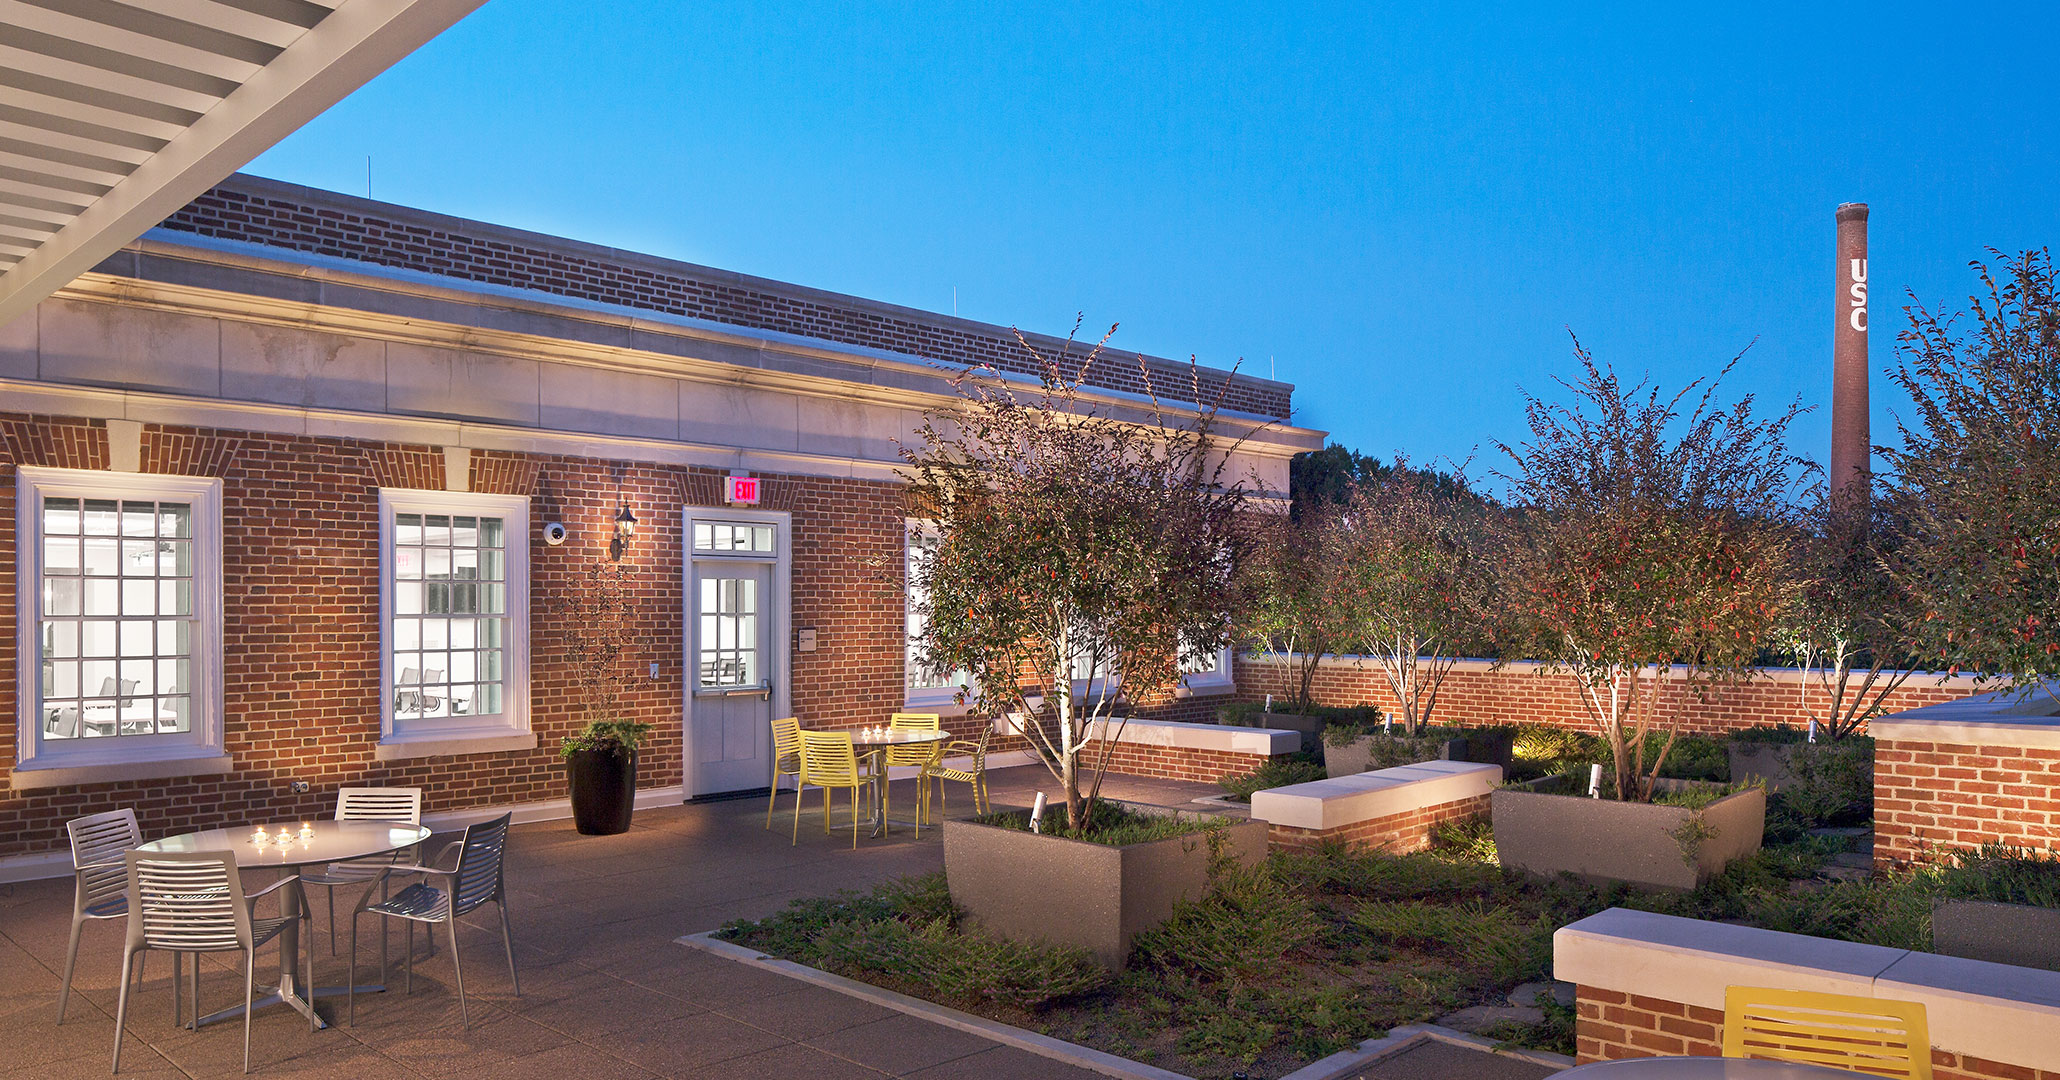 University of South Carolina hired Boudreaux architects to plan exterior spaces at the School of Journalism.